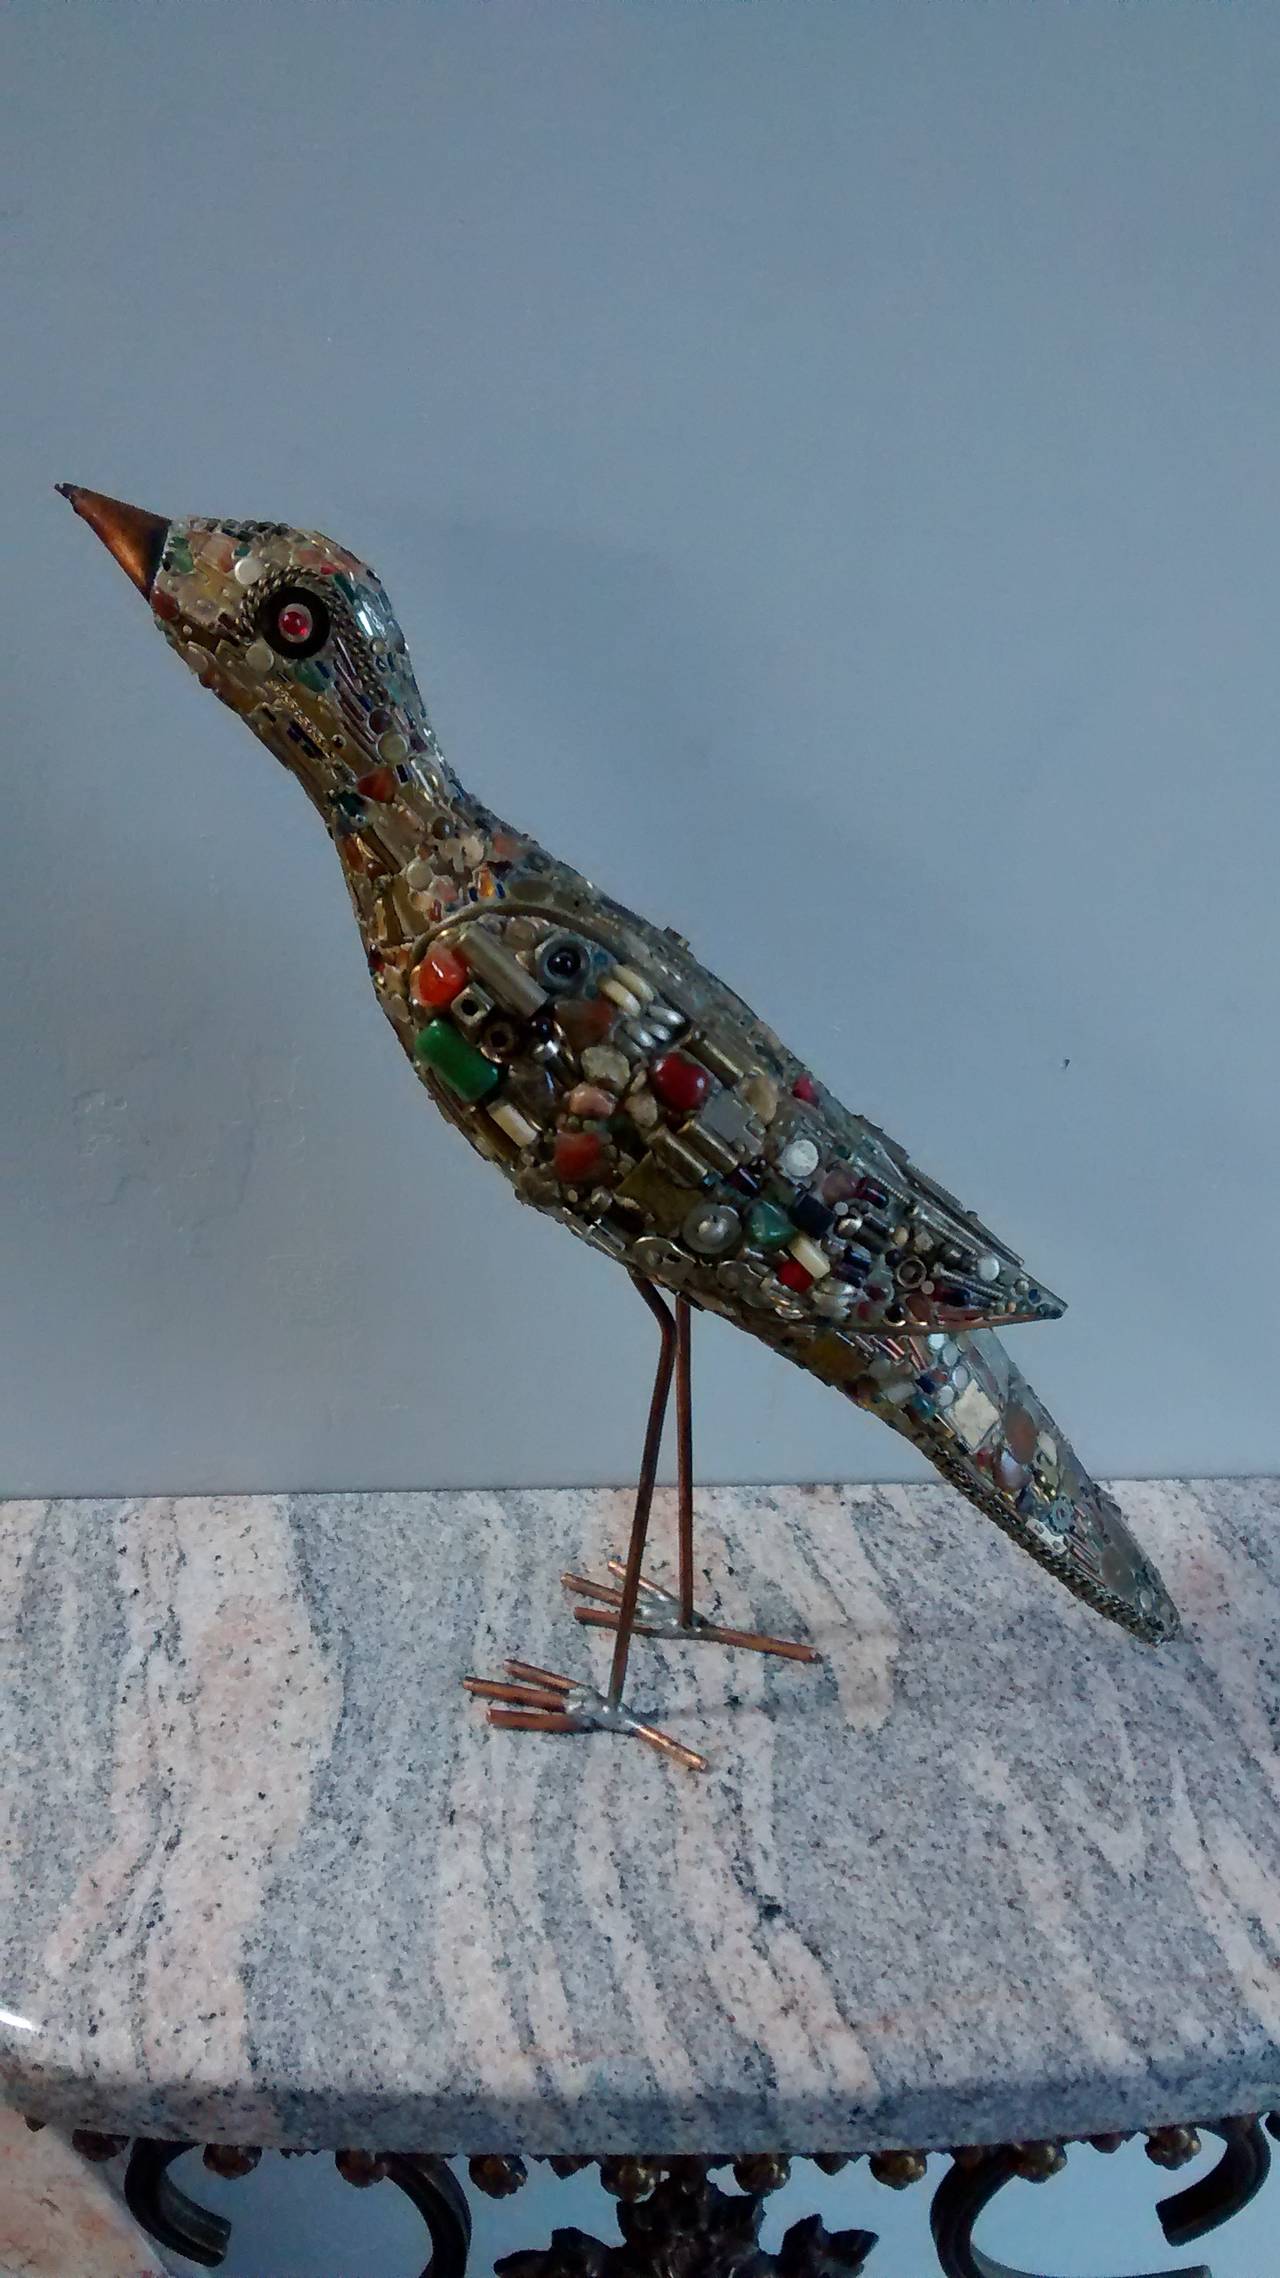 Wonderfully creative standing bird sculpture by F. Moller, dating to the early 1970's. 

Comprised of various found objects including capacitors, nuts, bolts, zippers, early computer parts, transistors, and various other items.